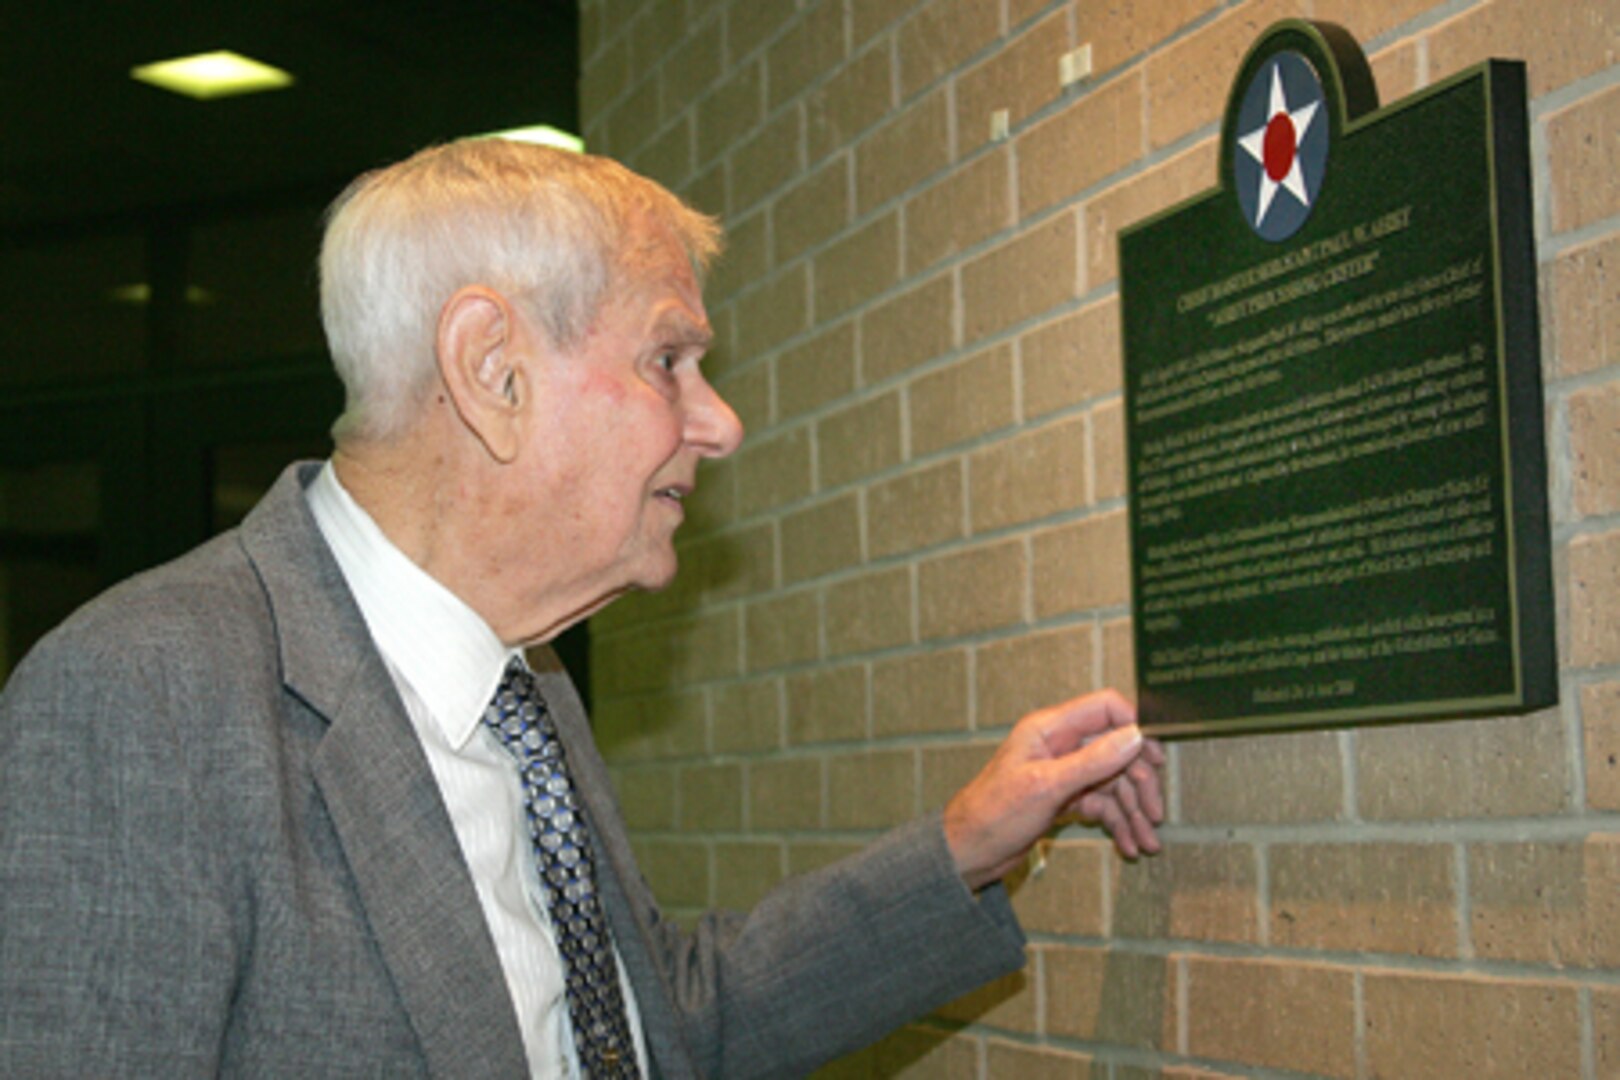 First Chief Master Sergeant of the Air Force, Paul W. Airey, reads a plaque historically naming the 319th Training Squadron to the Airey Processing Center at Lackland Air Force Base, Texas on Wednesday, June 14, 2006.  In all, nine Basic Training facilities were named for Enlisted heroes.                                 